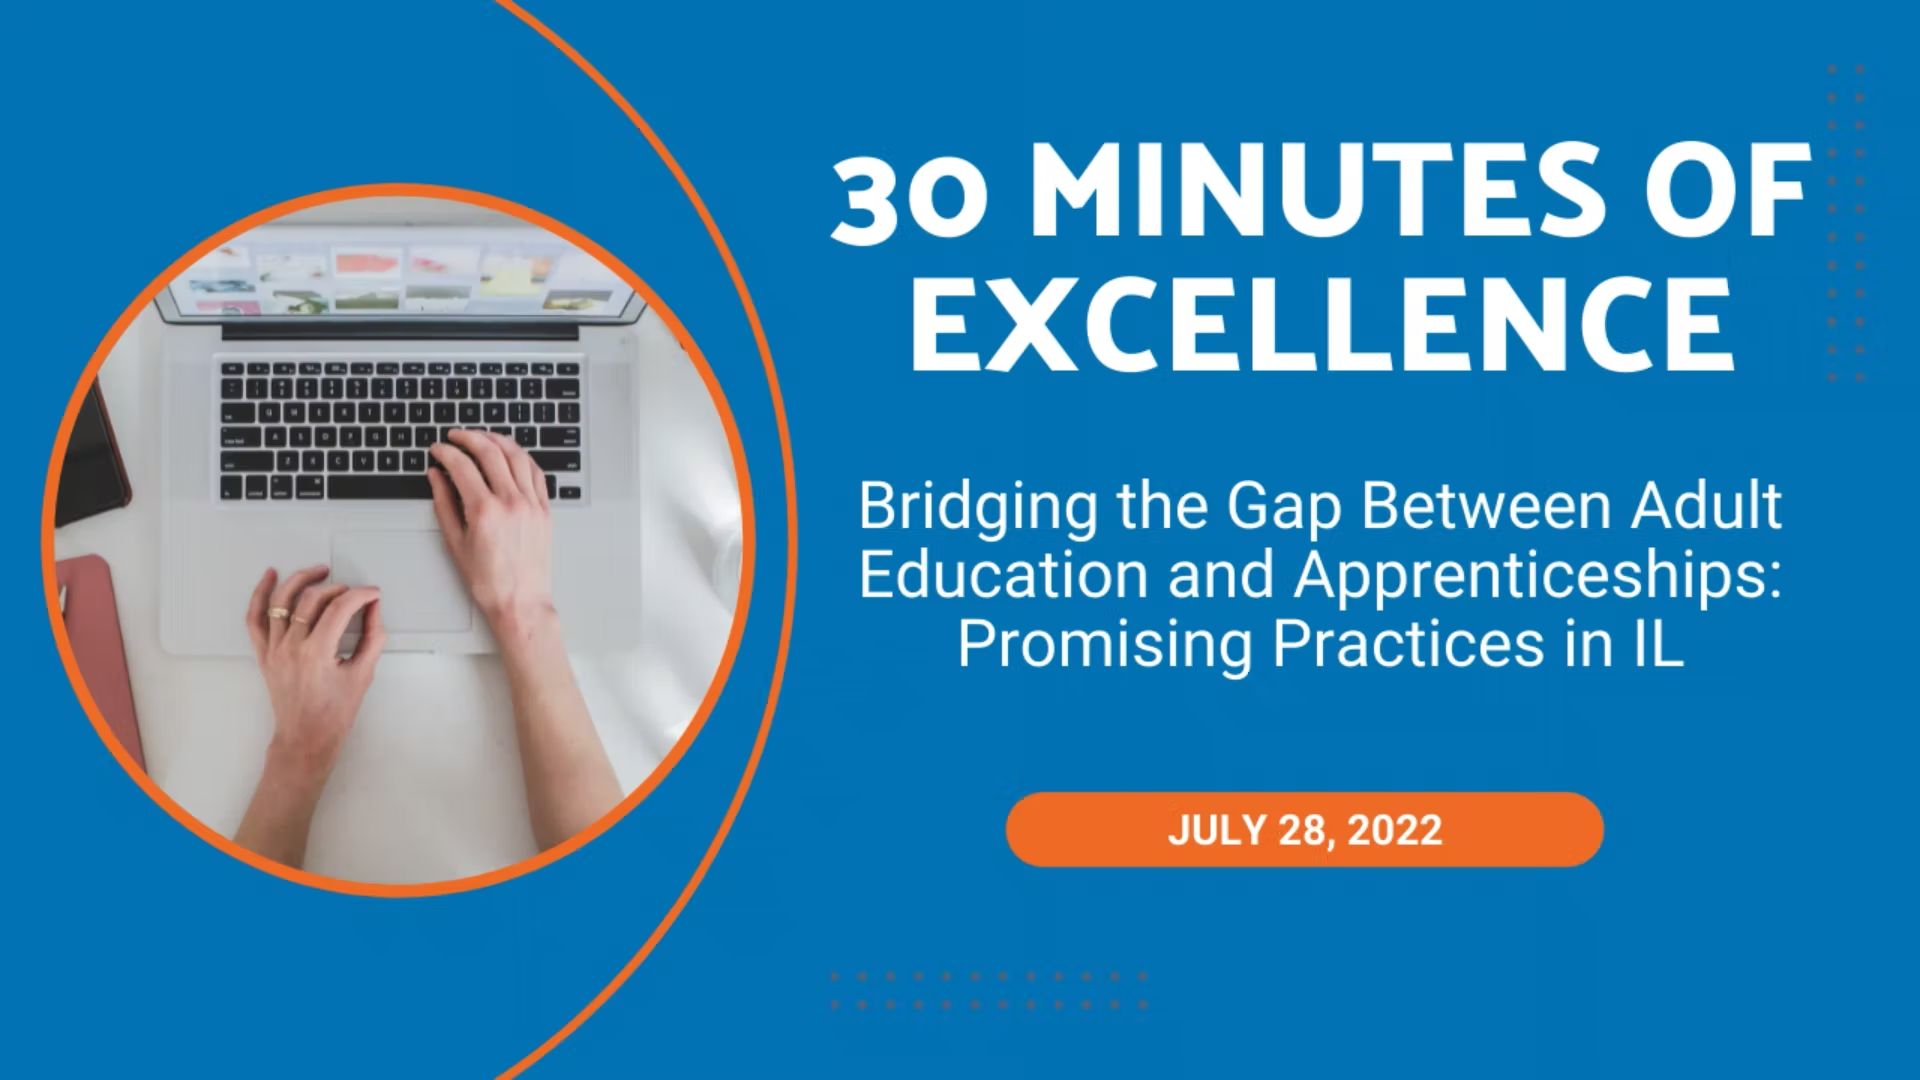 30 Minutes of Excellence - Bridging the Gap Between Adult Education and Apprenticeships